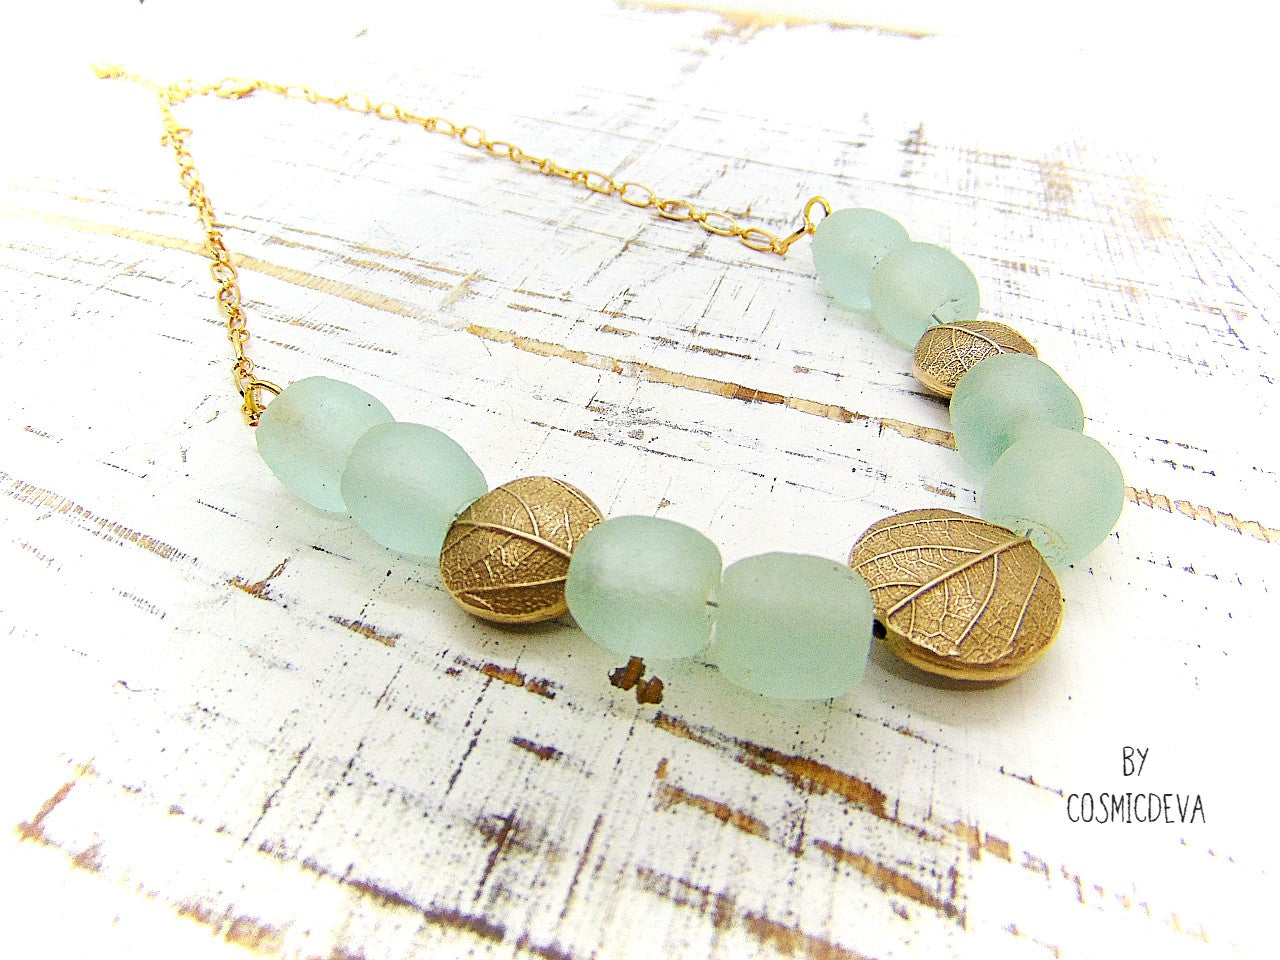 This is a truly unique and elegant botanical necklace. The hand formed gold bronze natural leaf lentil beads are made from an imprint of a leaf which I picked from a bush in my backyard. This organic gold bronze necklace is adorned with beautiful recycled ocean aqua blue glass beads.